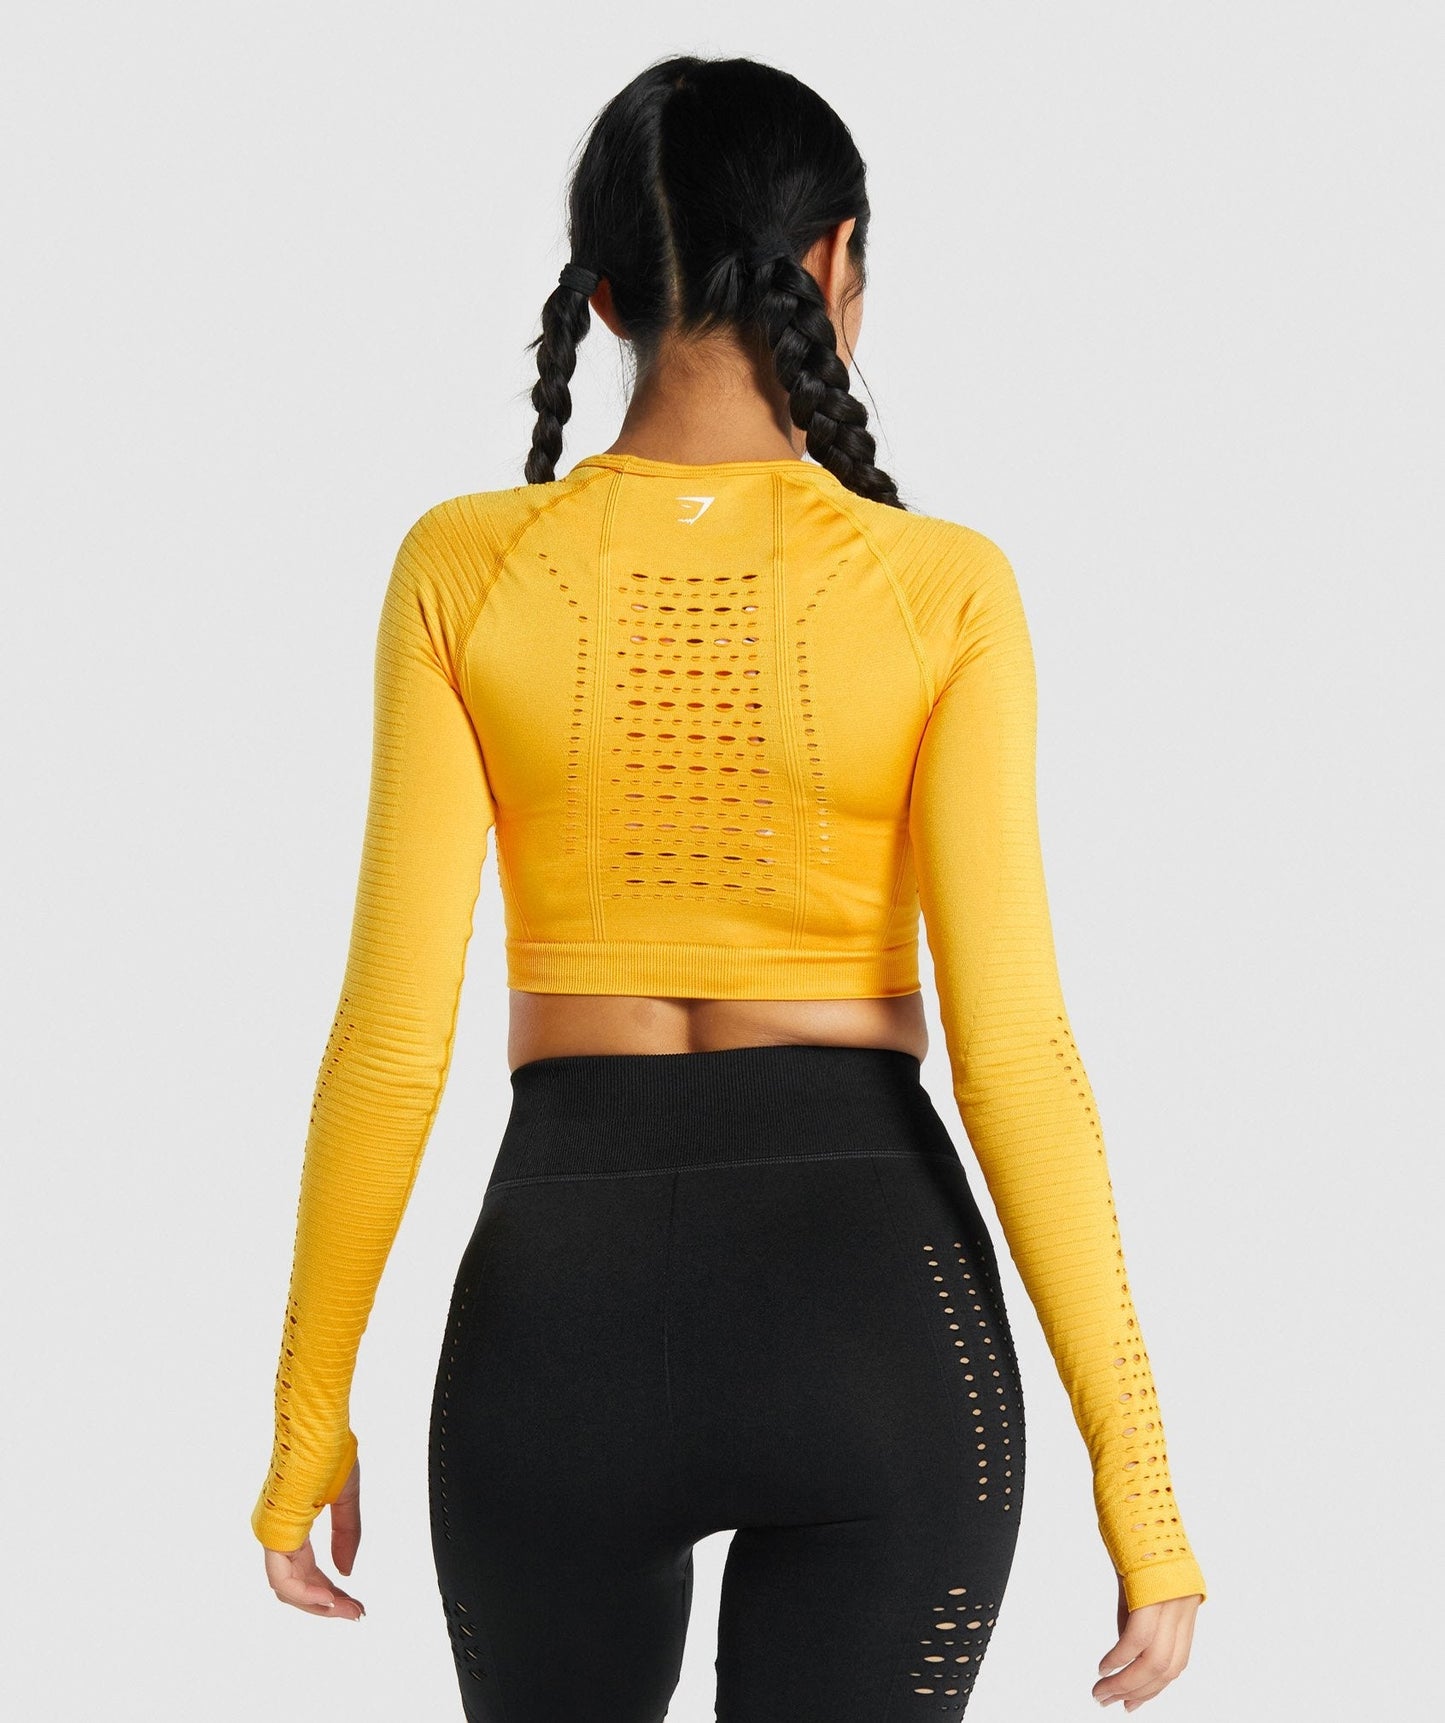 Gymshark Glow Long Sleeve Seamless Crop Top - Yellow – Client 446 100K  products